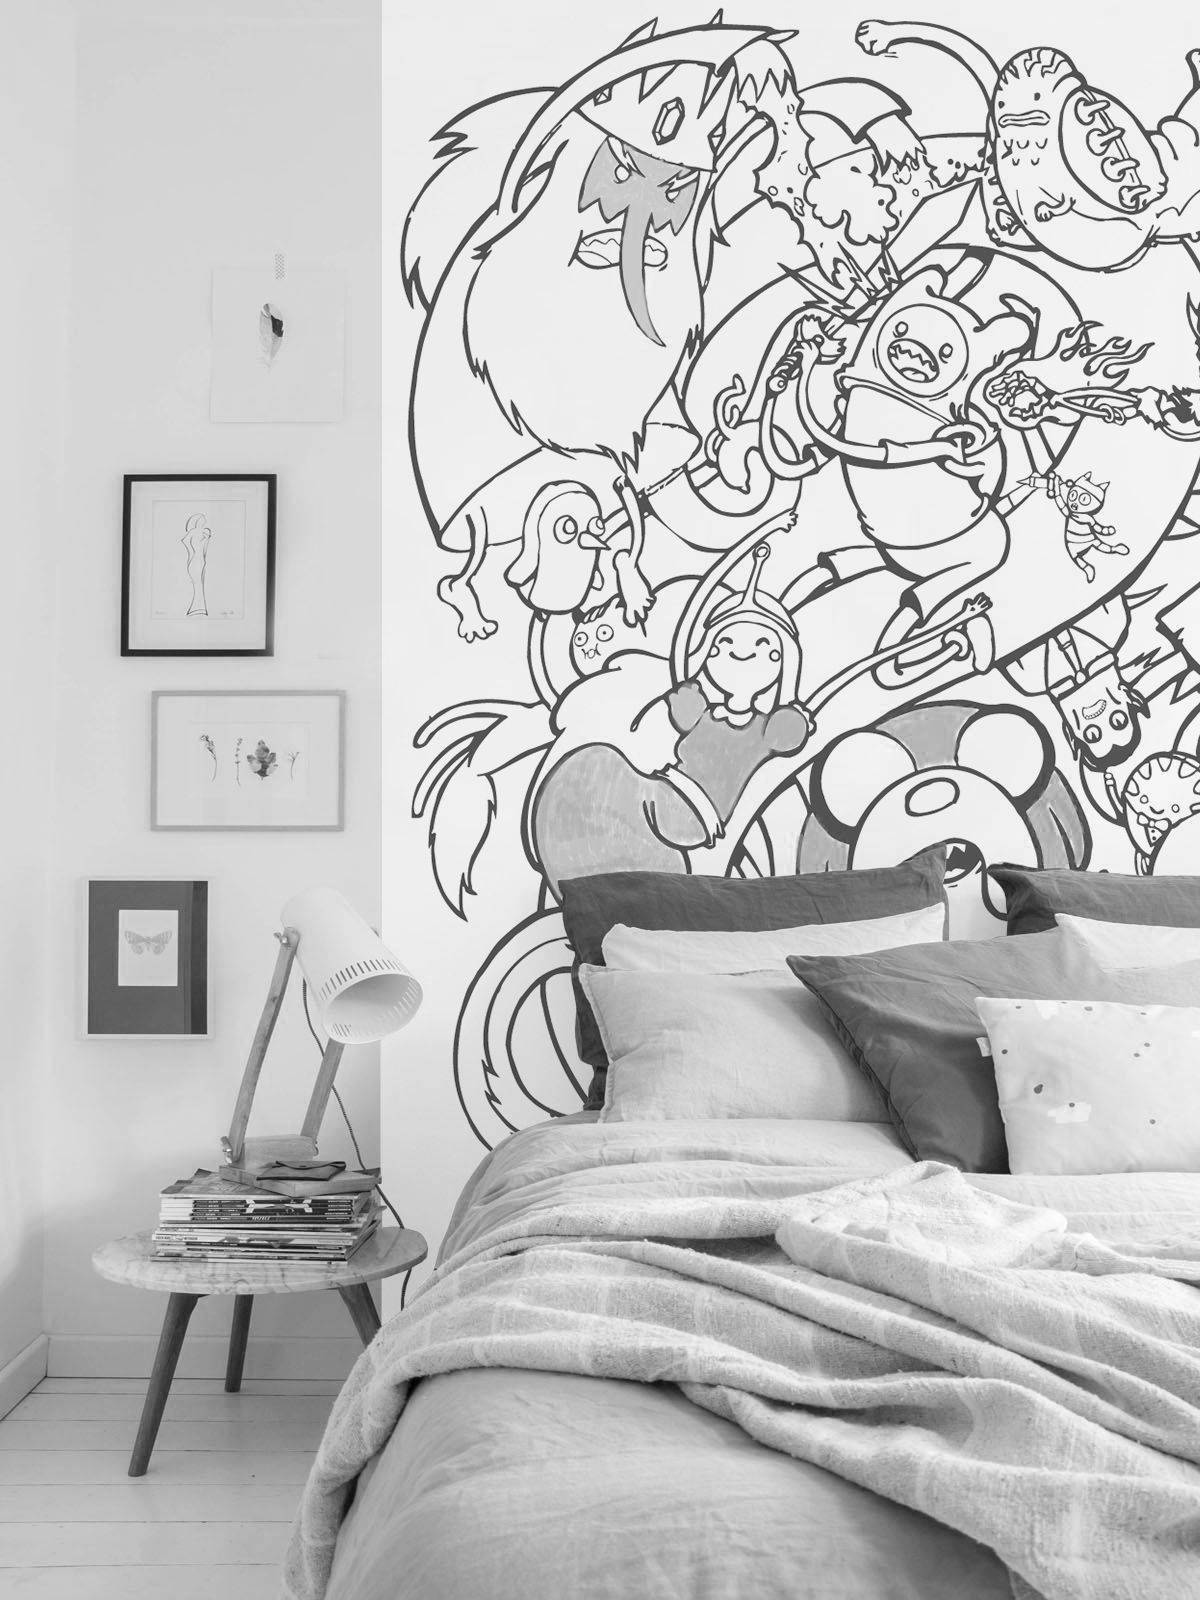 Creative coloring on the wall